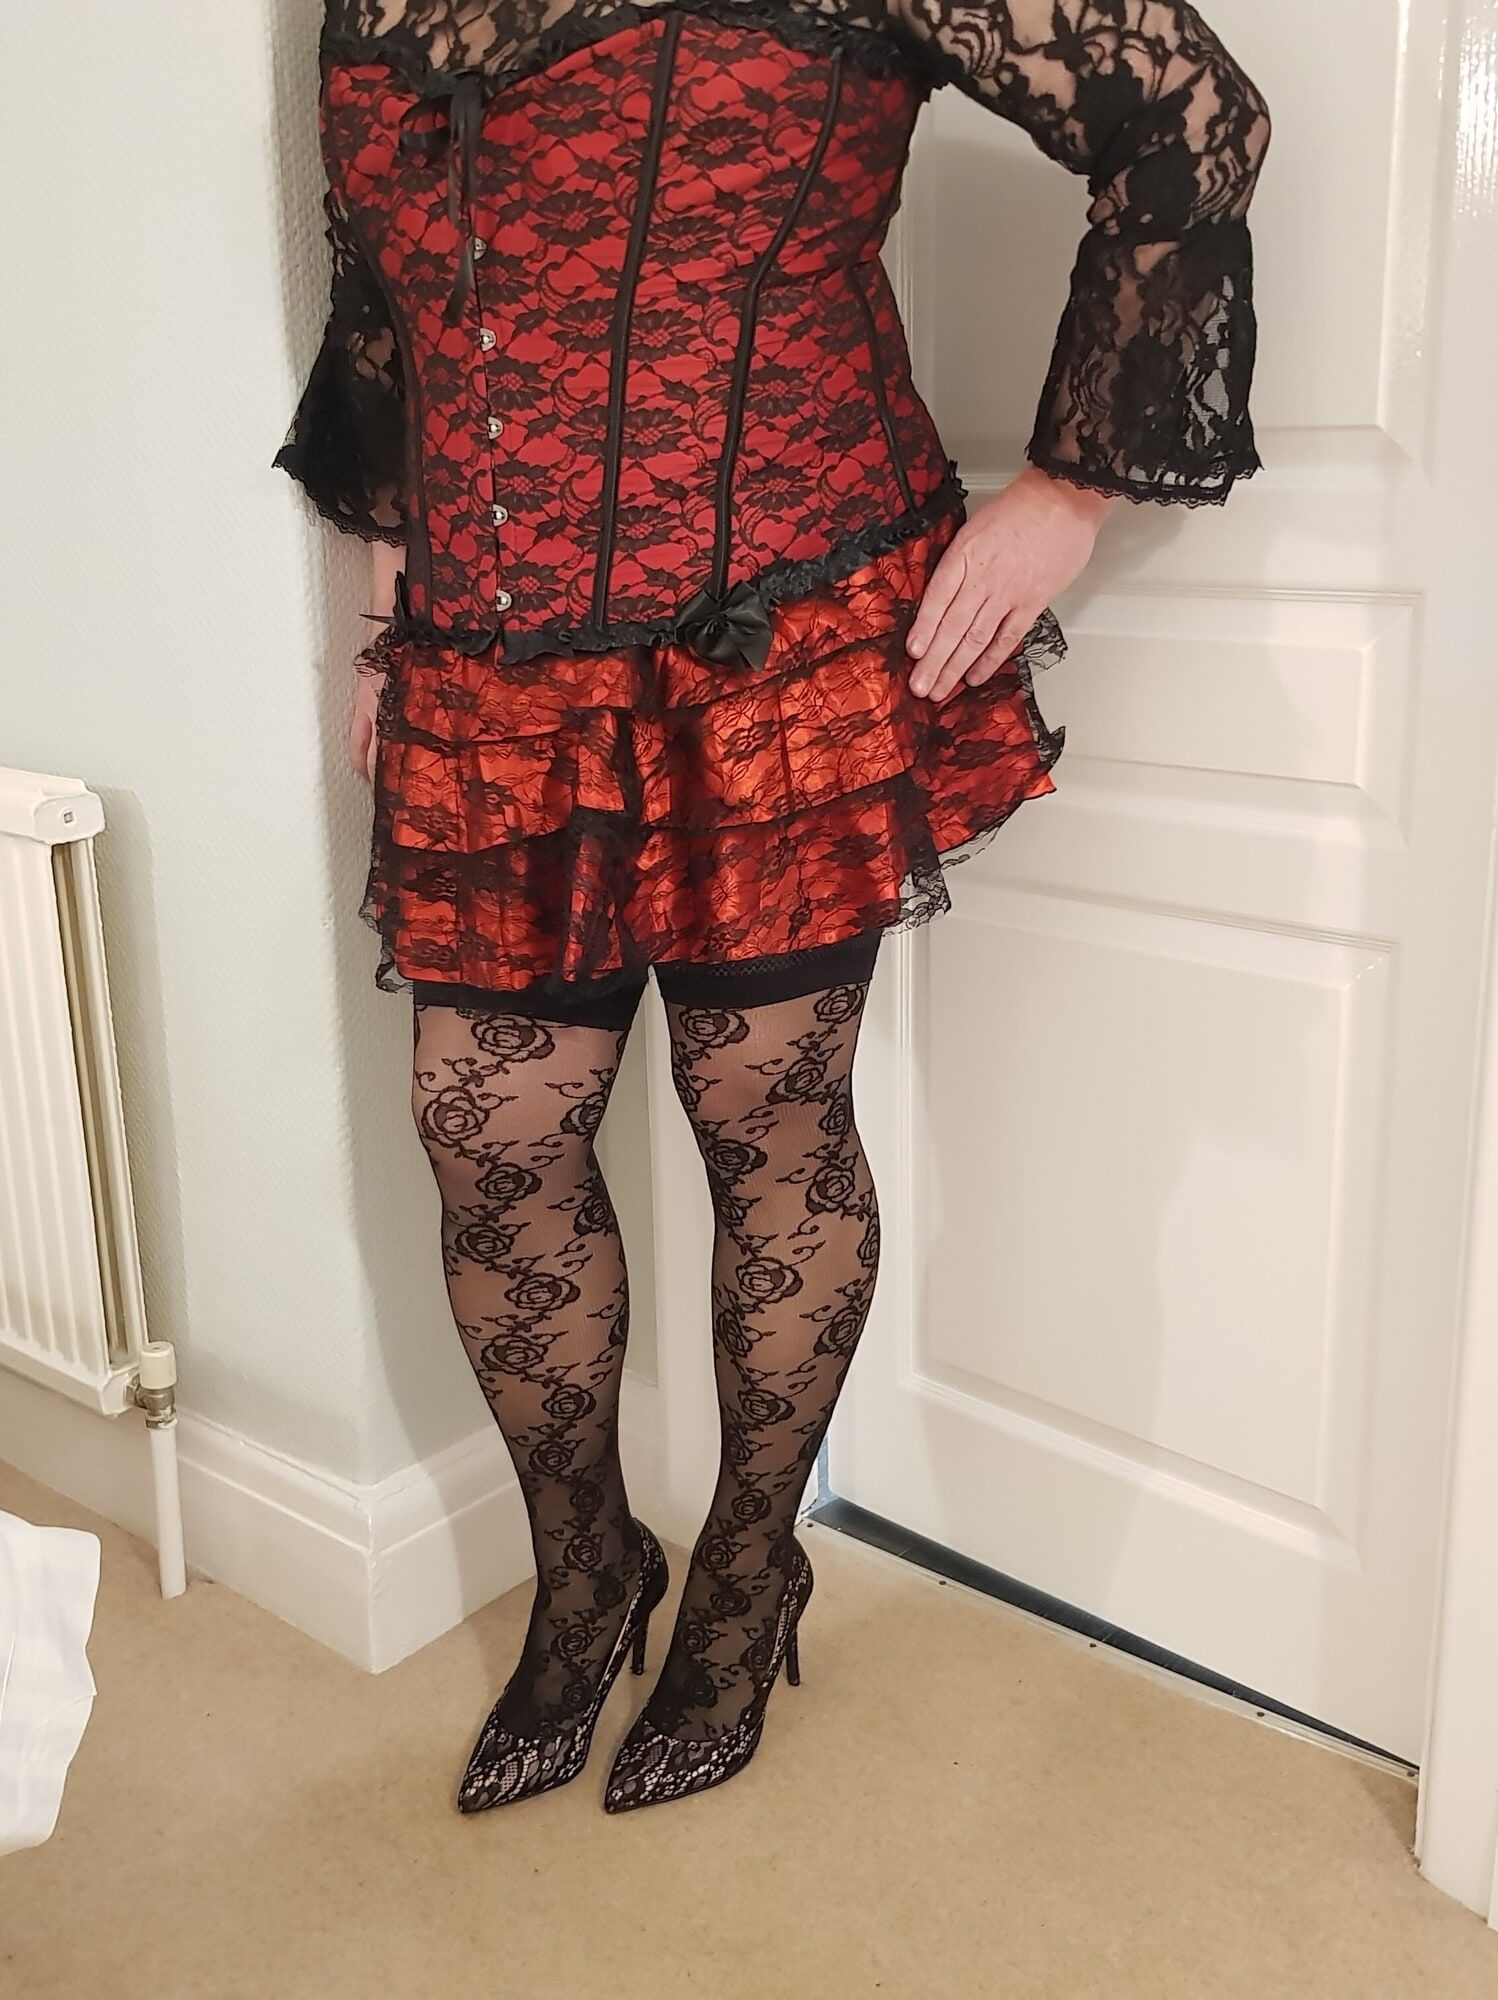 Crossdressing in floral lace lingerie, skirt and heels #3